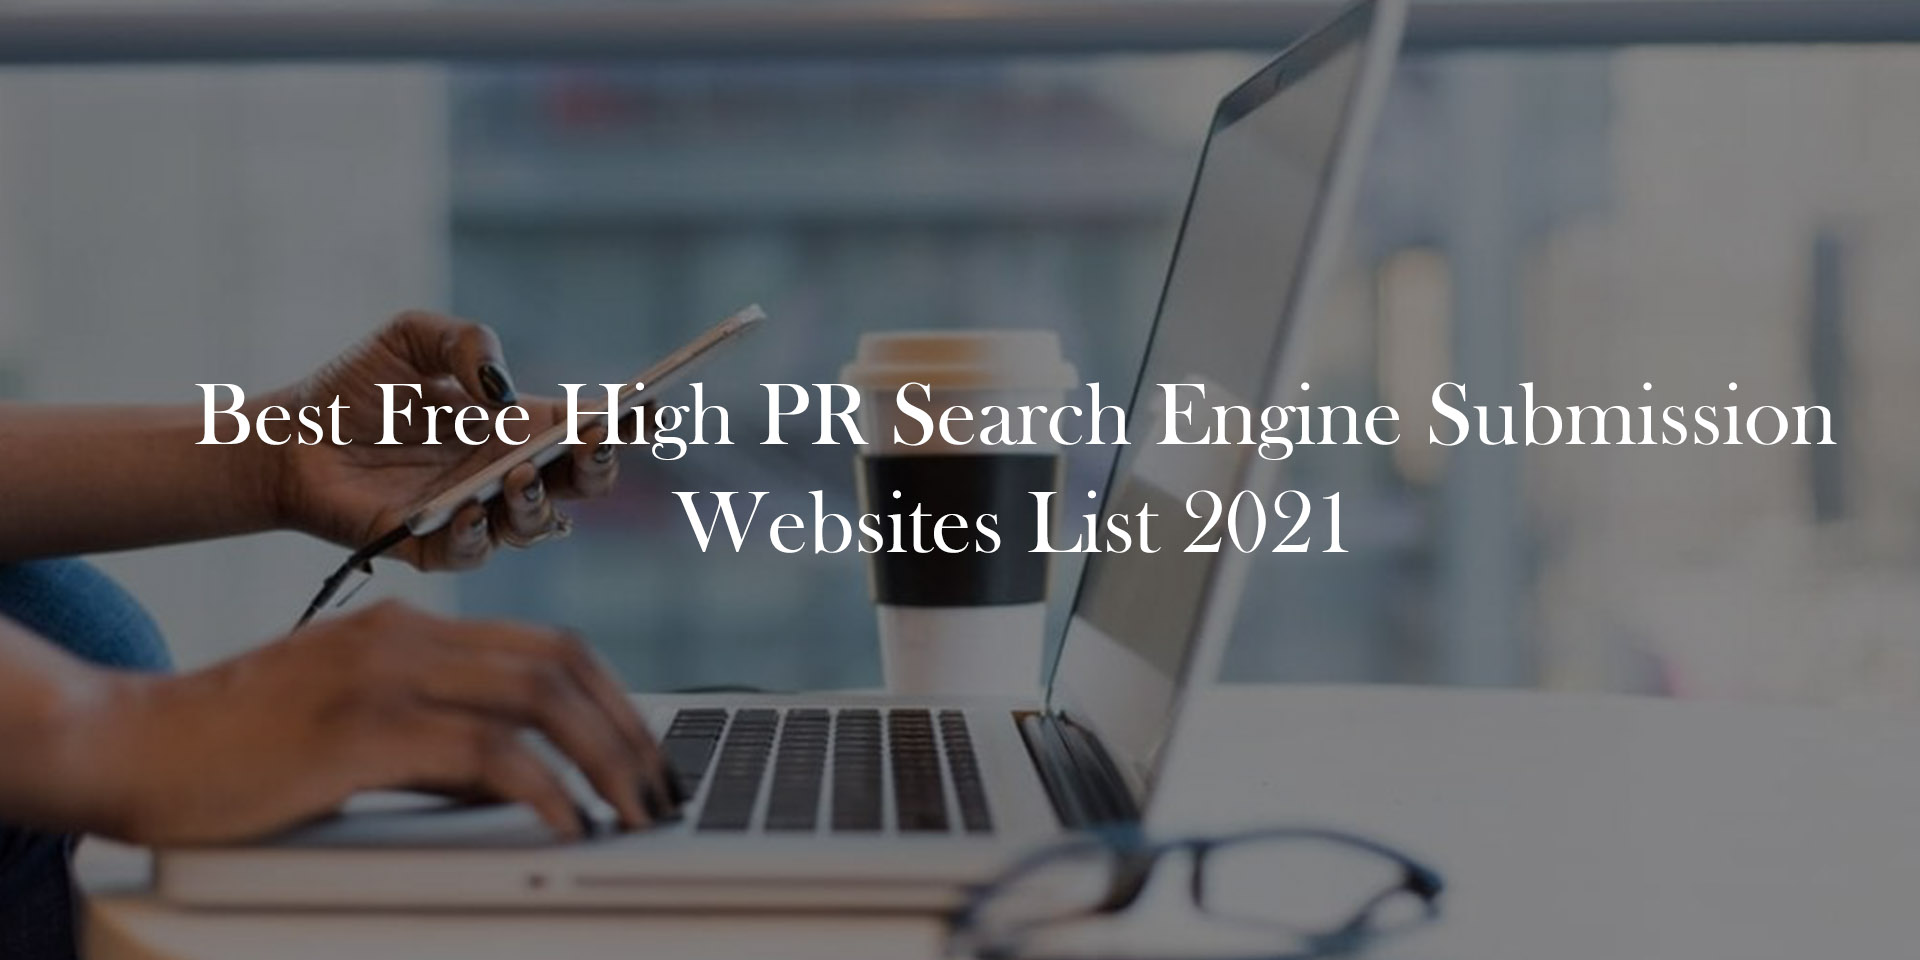 Best Free High PR Search Engine Submission Websites List 2021